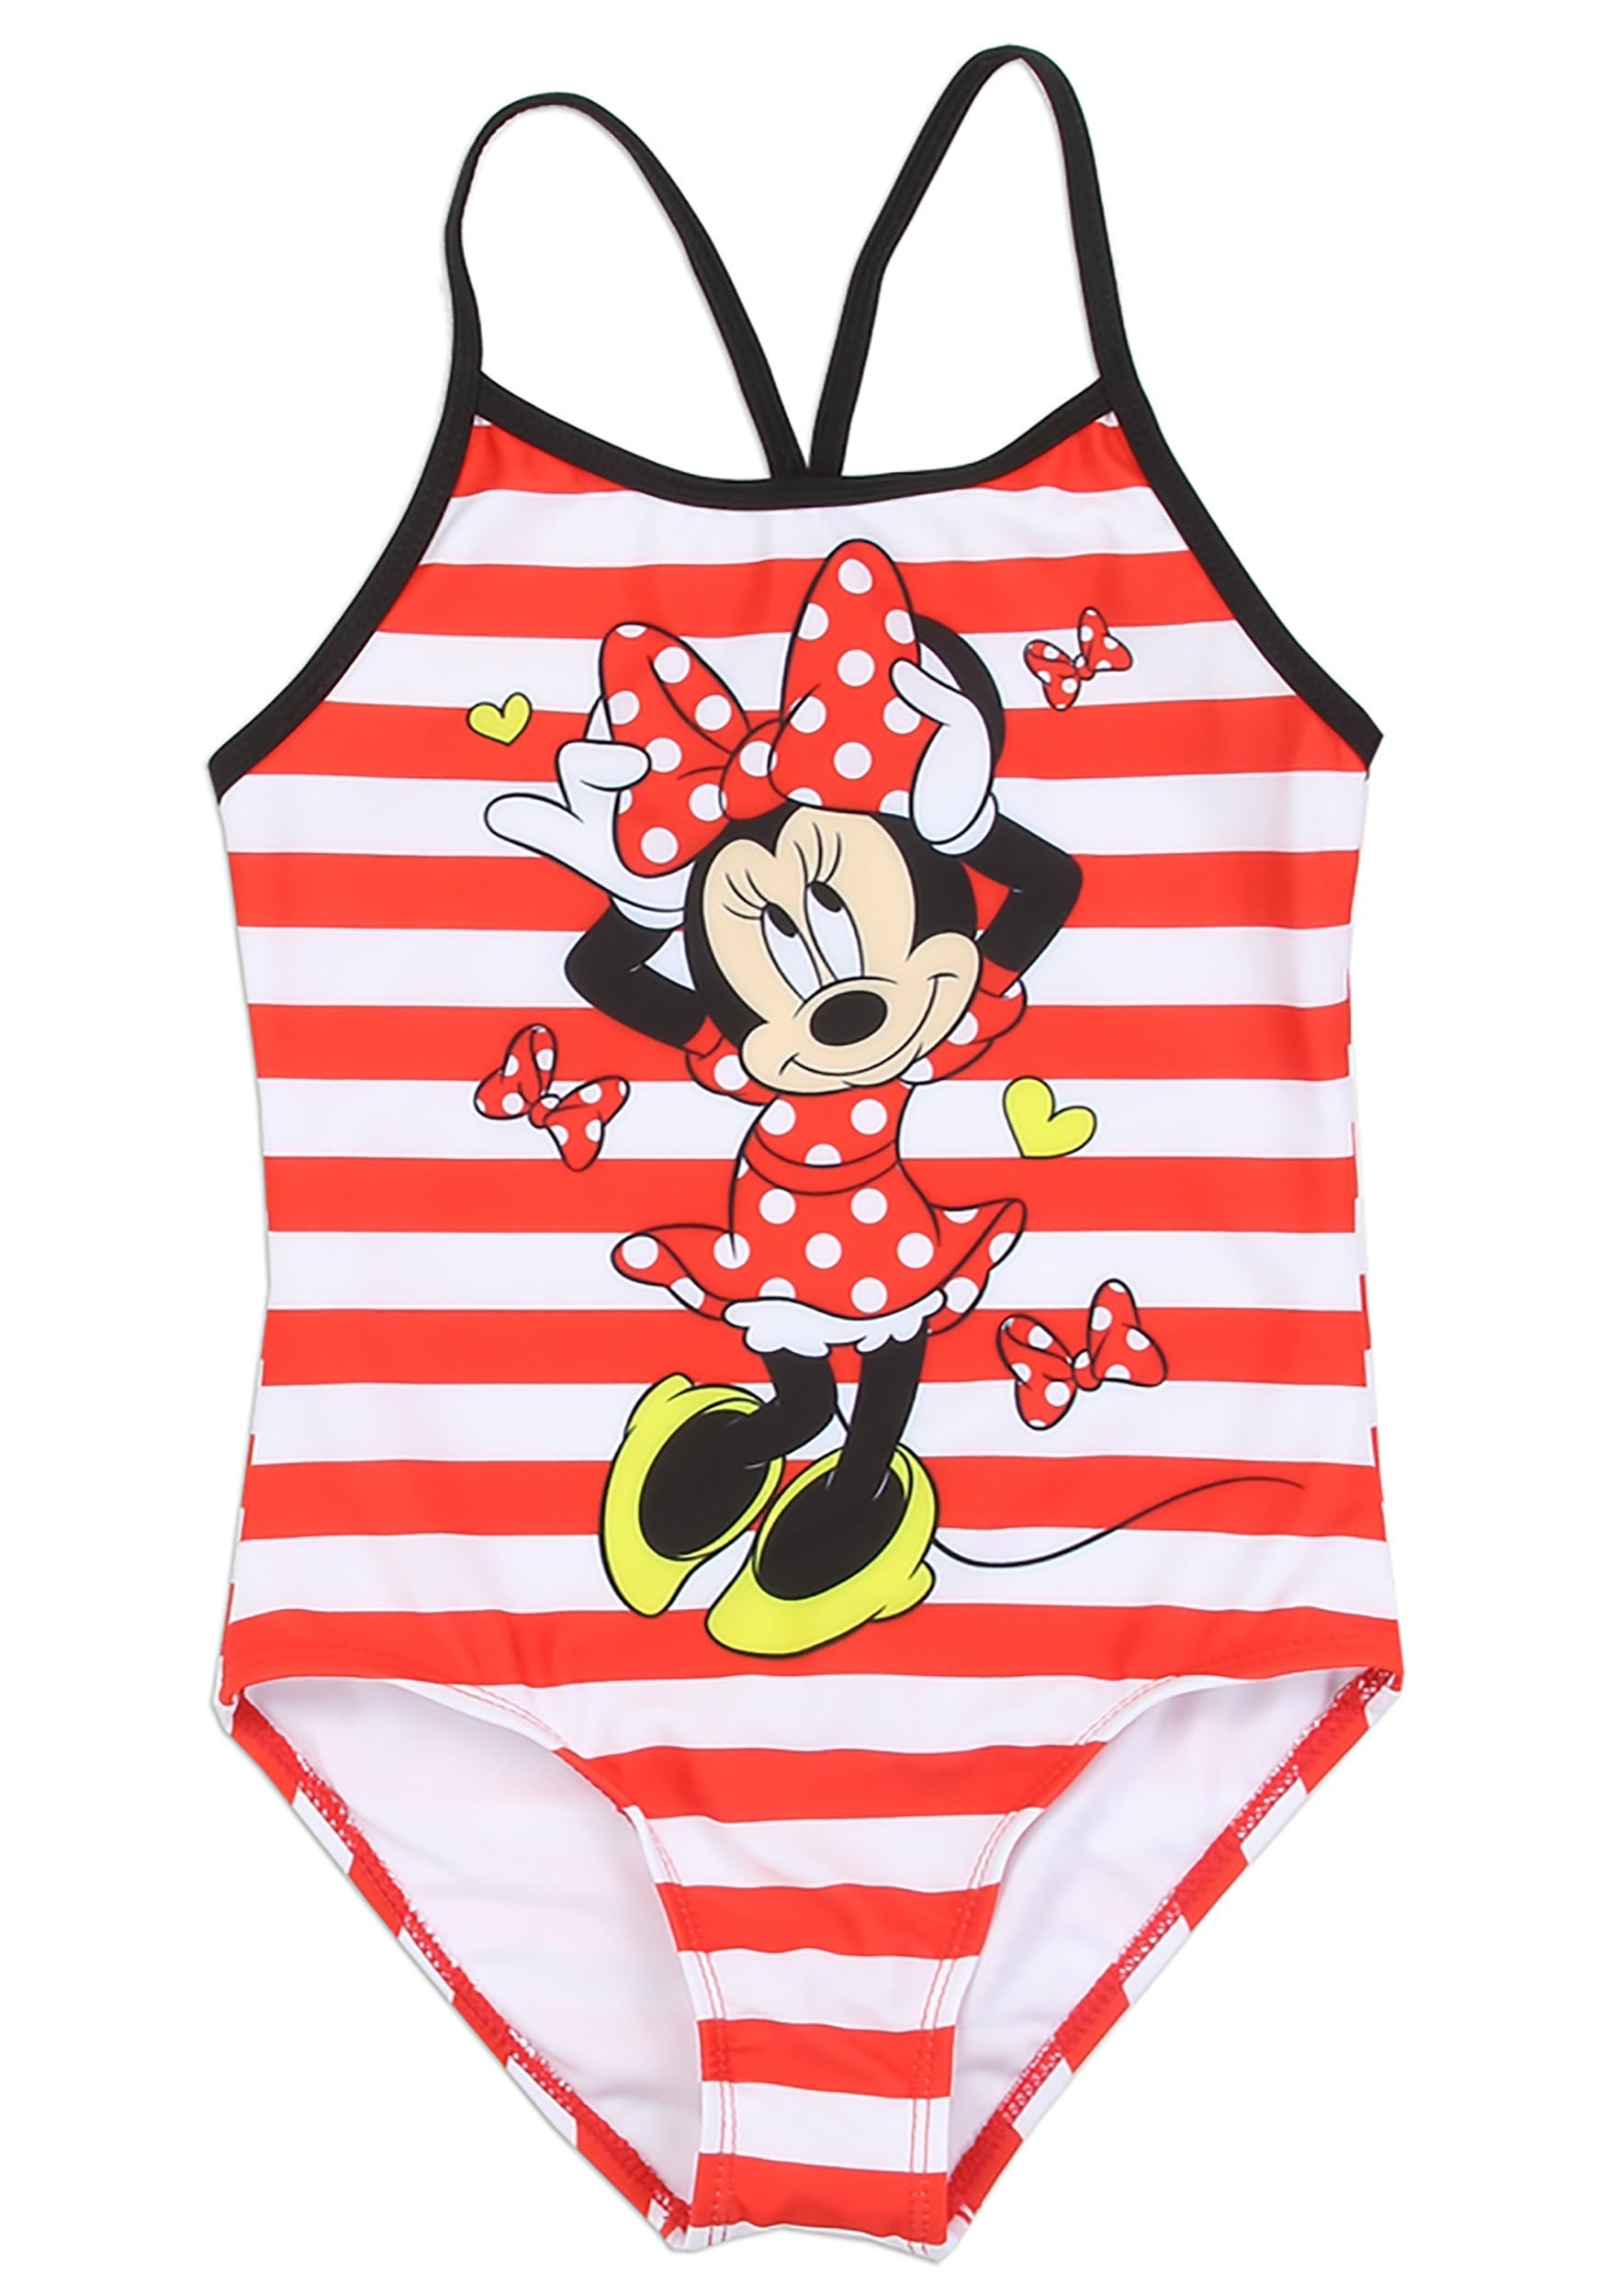 Disney Minnie Mouse Red Tutu One Piece Swimsuit Baby Girl 12 18 24 Mo NWT $28